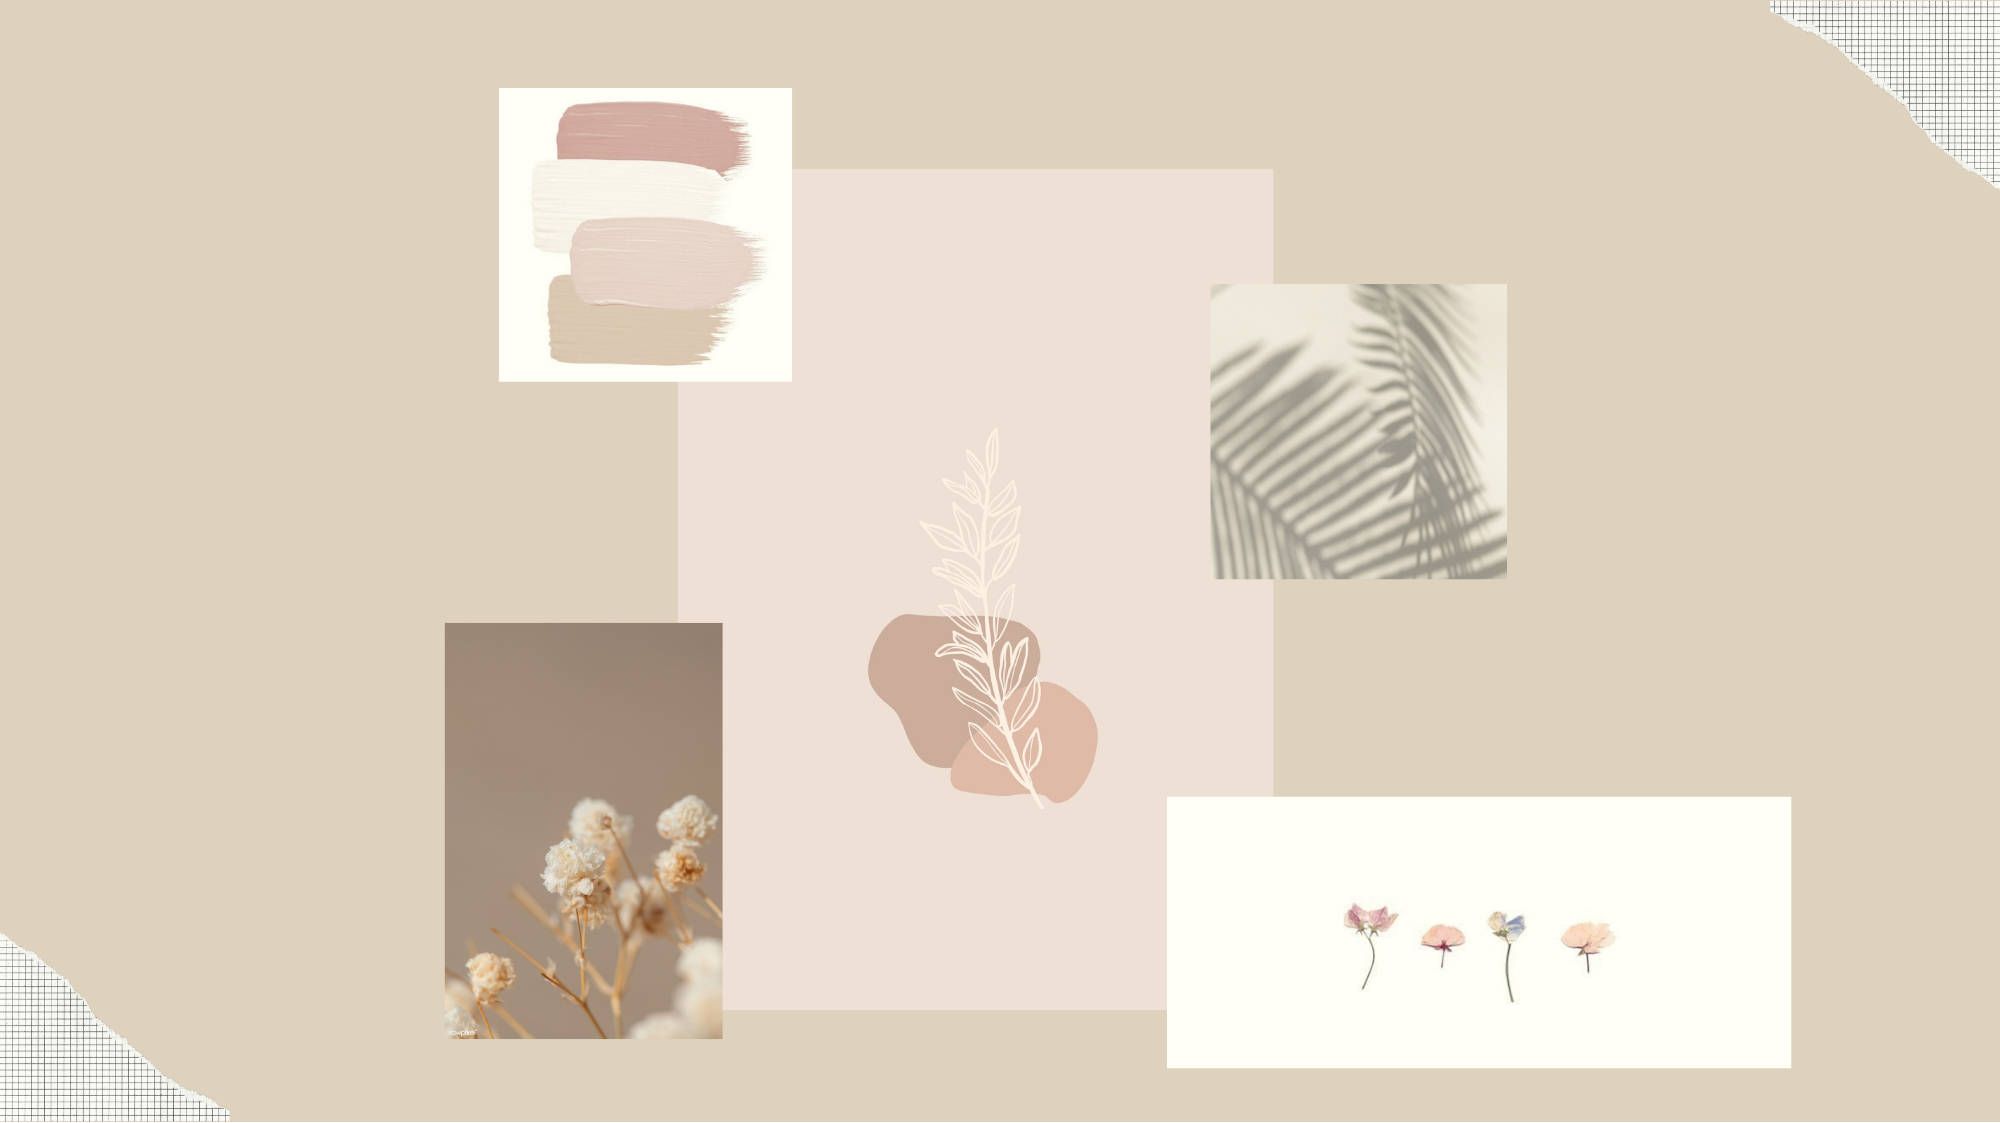 A mood board with beige and pink tones - Beige